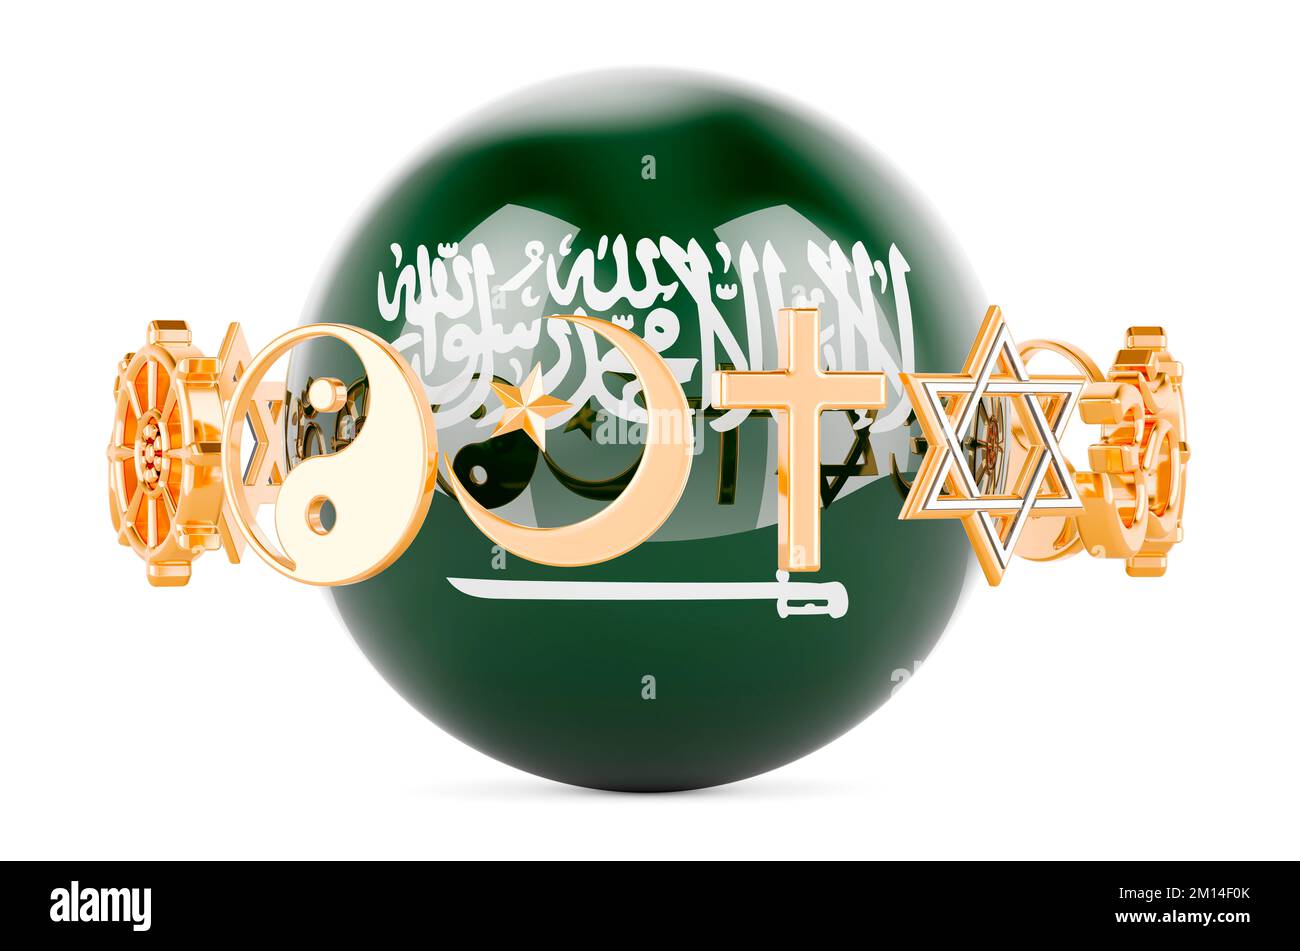 Saudi Arabian flag painted on sphere with religions symbols around, 3D rendering isolated on white background Stock Photo